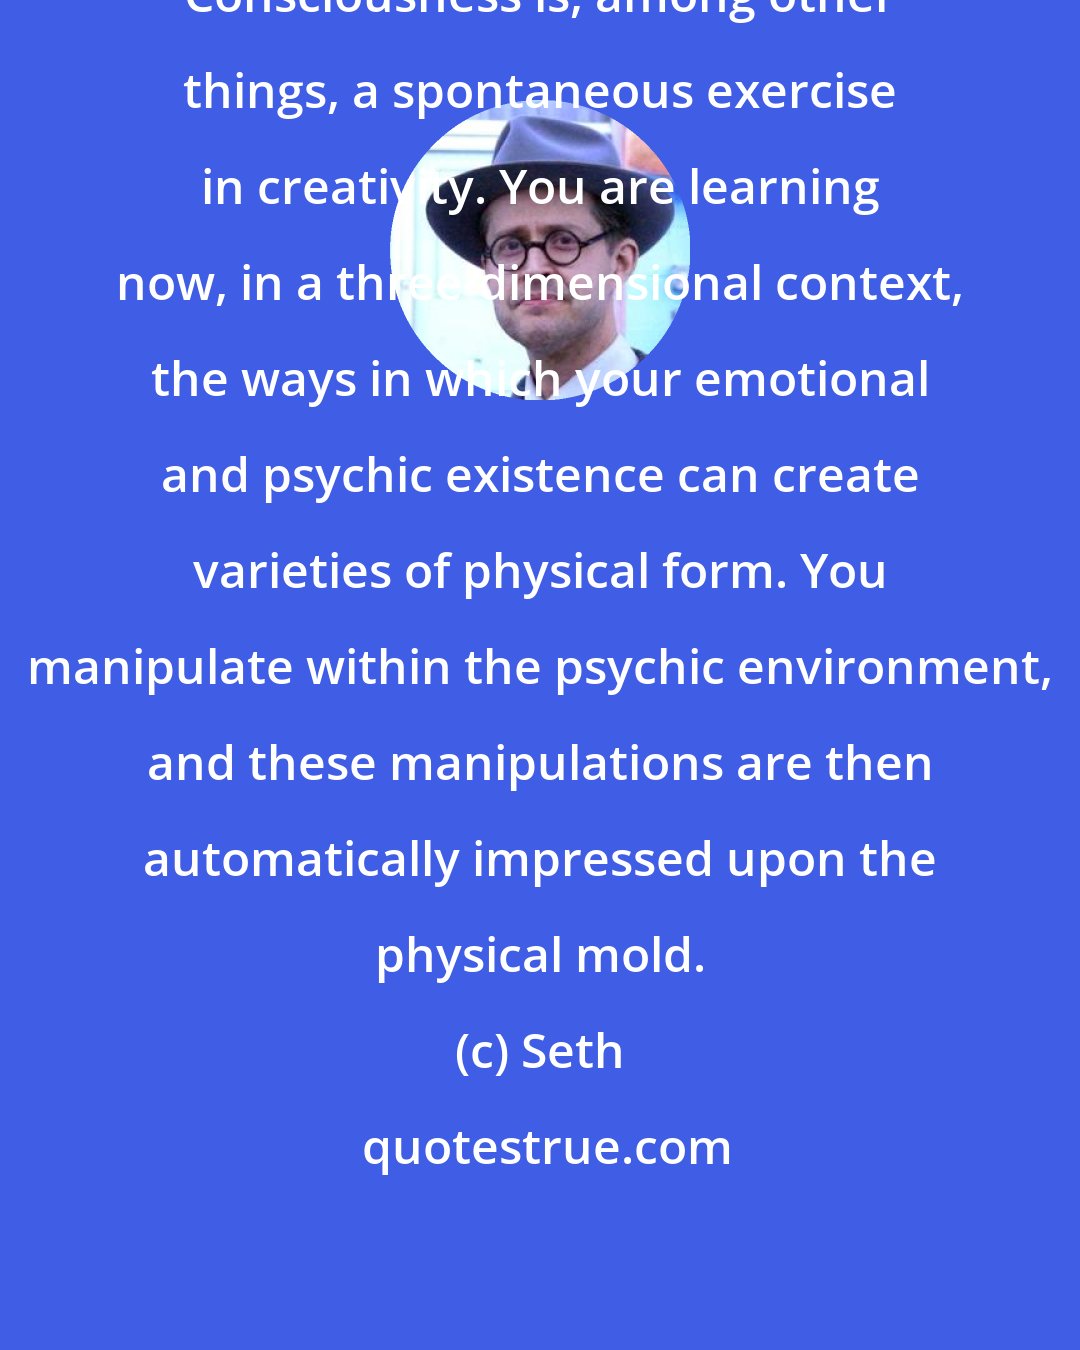 Seth: Consciousness is, among other things, a spontaneous exercise in creativity. You are learning now, in a three-dimensional context, the ways in which your emotional and psychic existence can create varieties of physical form. You manipulate within the psychic environment, and these manipulations are then automatically impressed upon the physical mold.